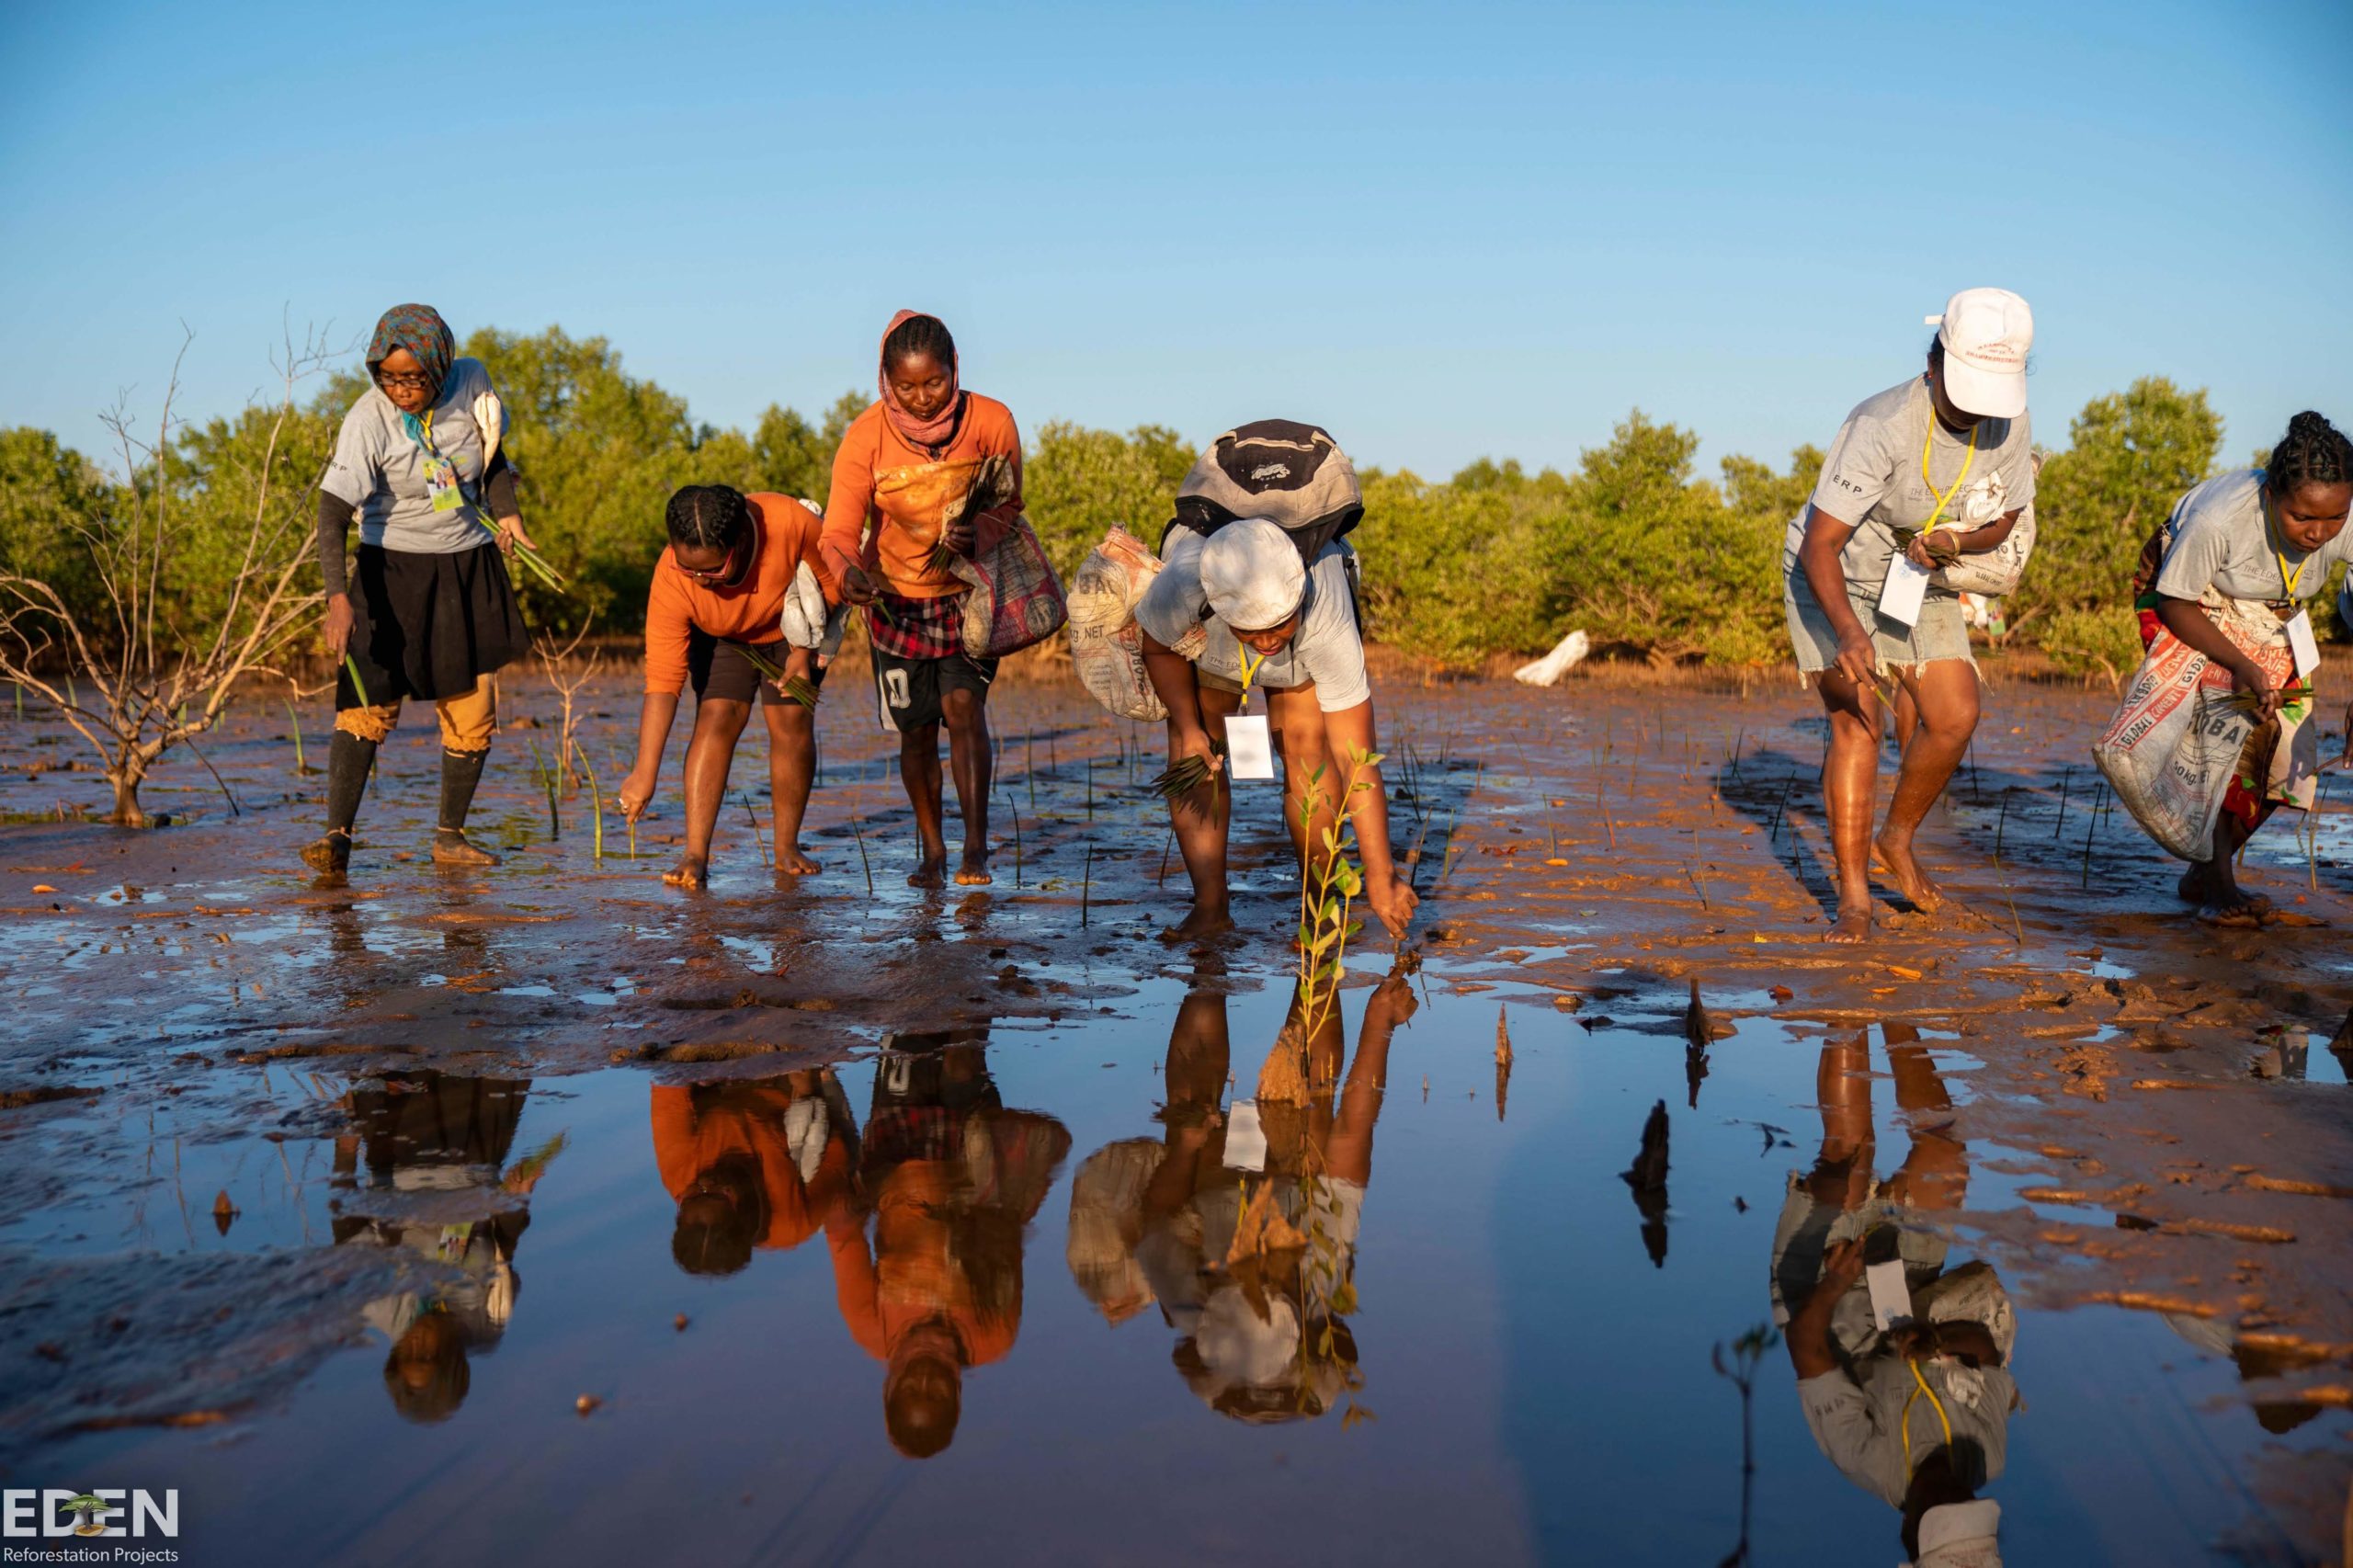 Local community members making an impact on the world by planting mangroves